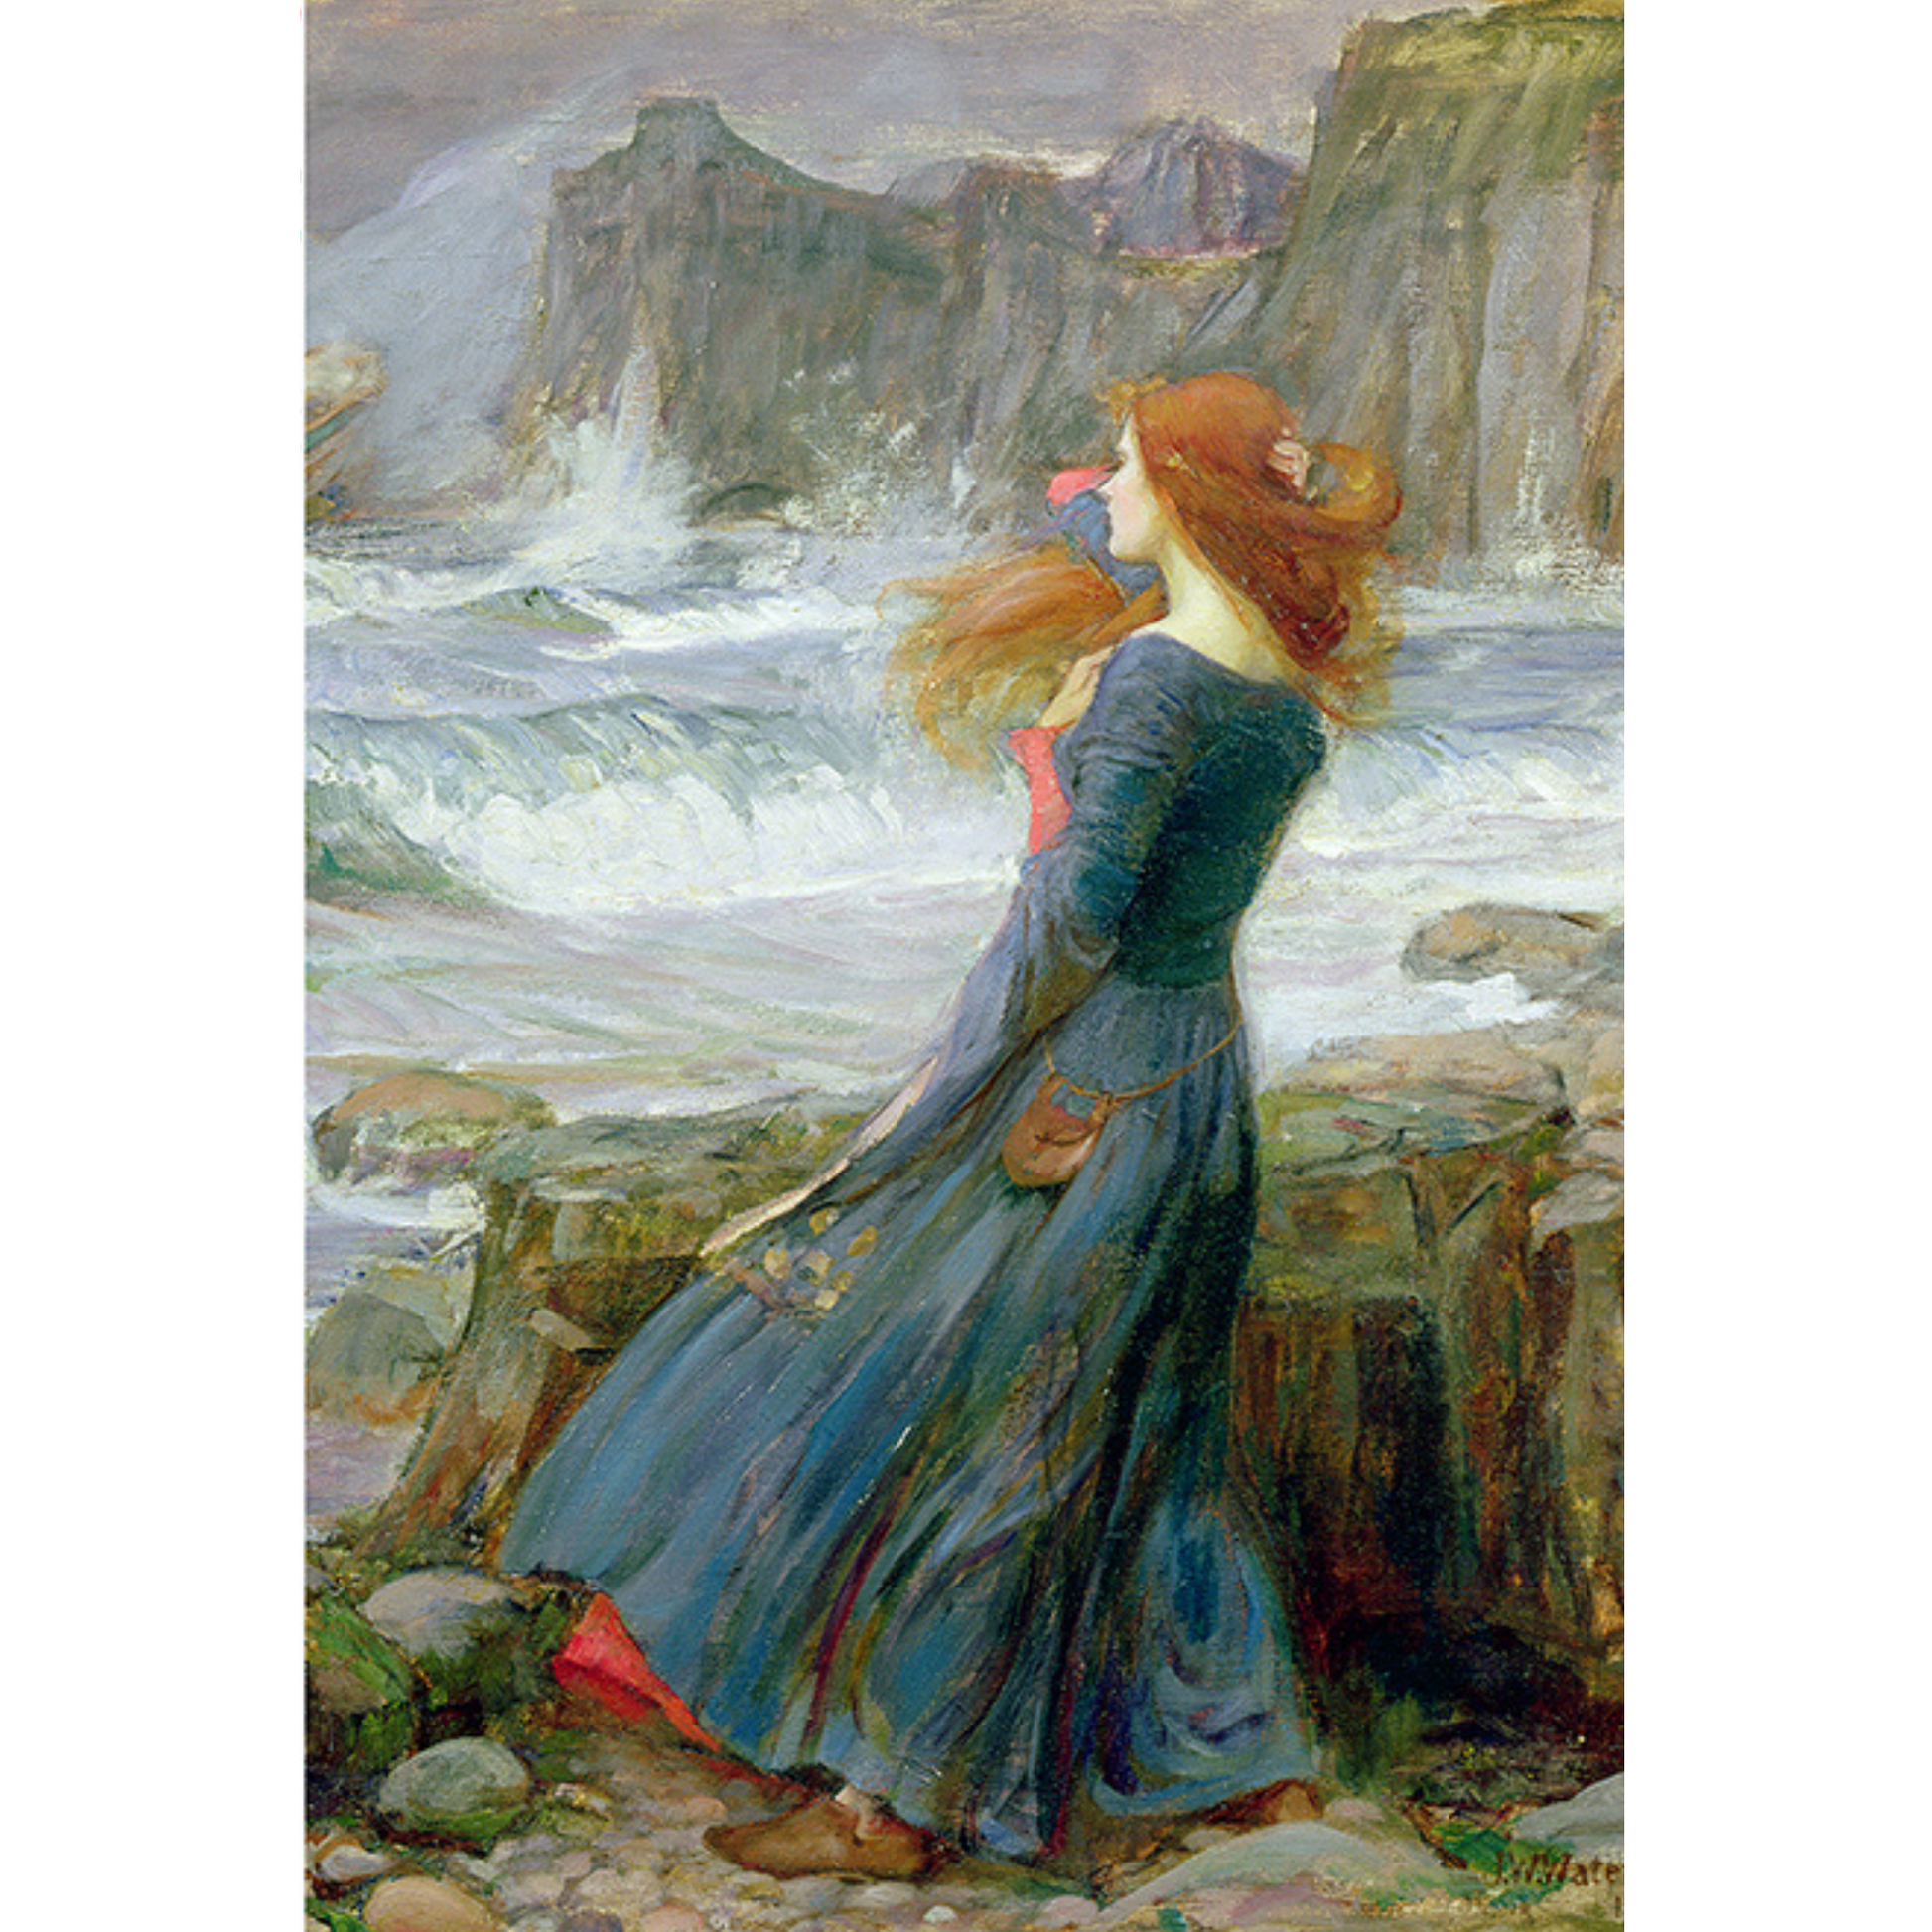 "Artwork-0104" Decoupage Rice Paper by Paper Designs. Reproduction of "Miranda the Tempest" by John Waterhouse. Sizes A3 and A4 available at Milton's Daughter